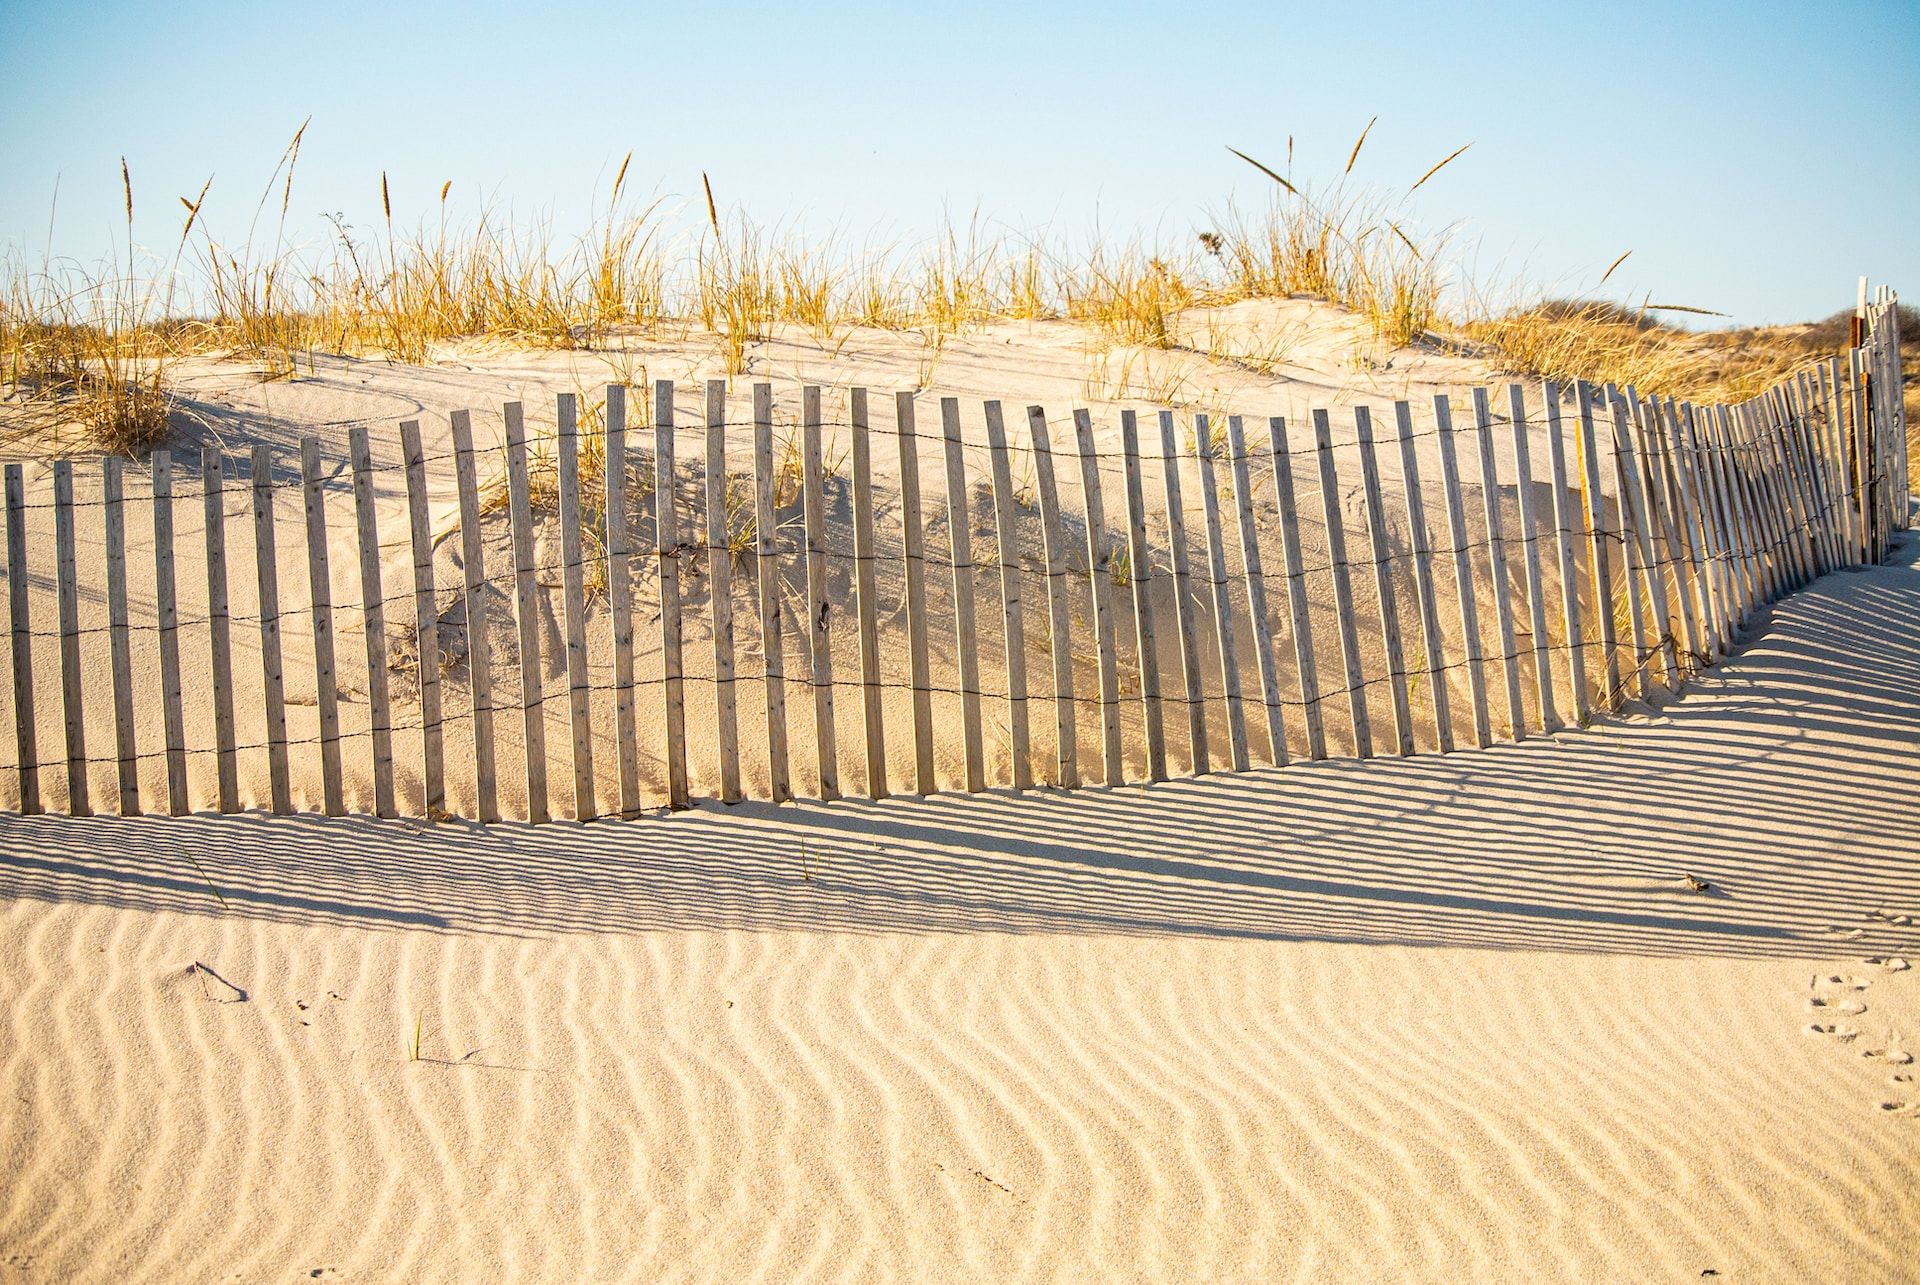 A fence along the sand dunes in Southampton, Long Island, New York